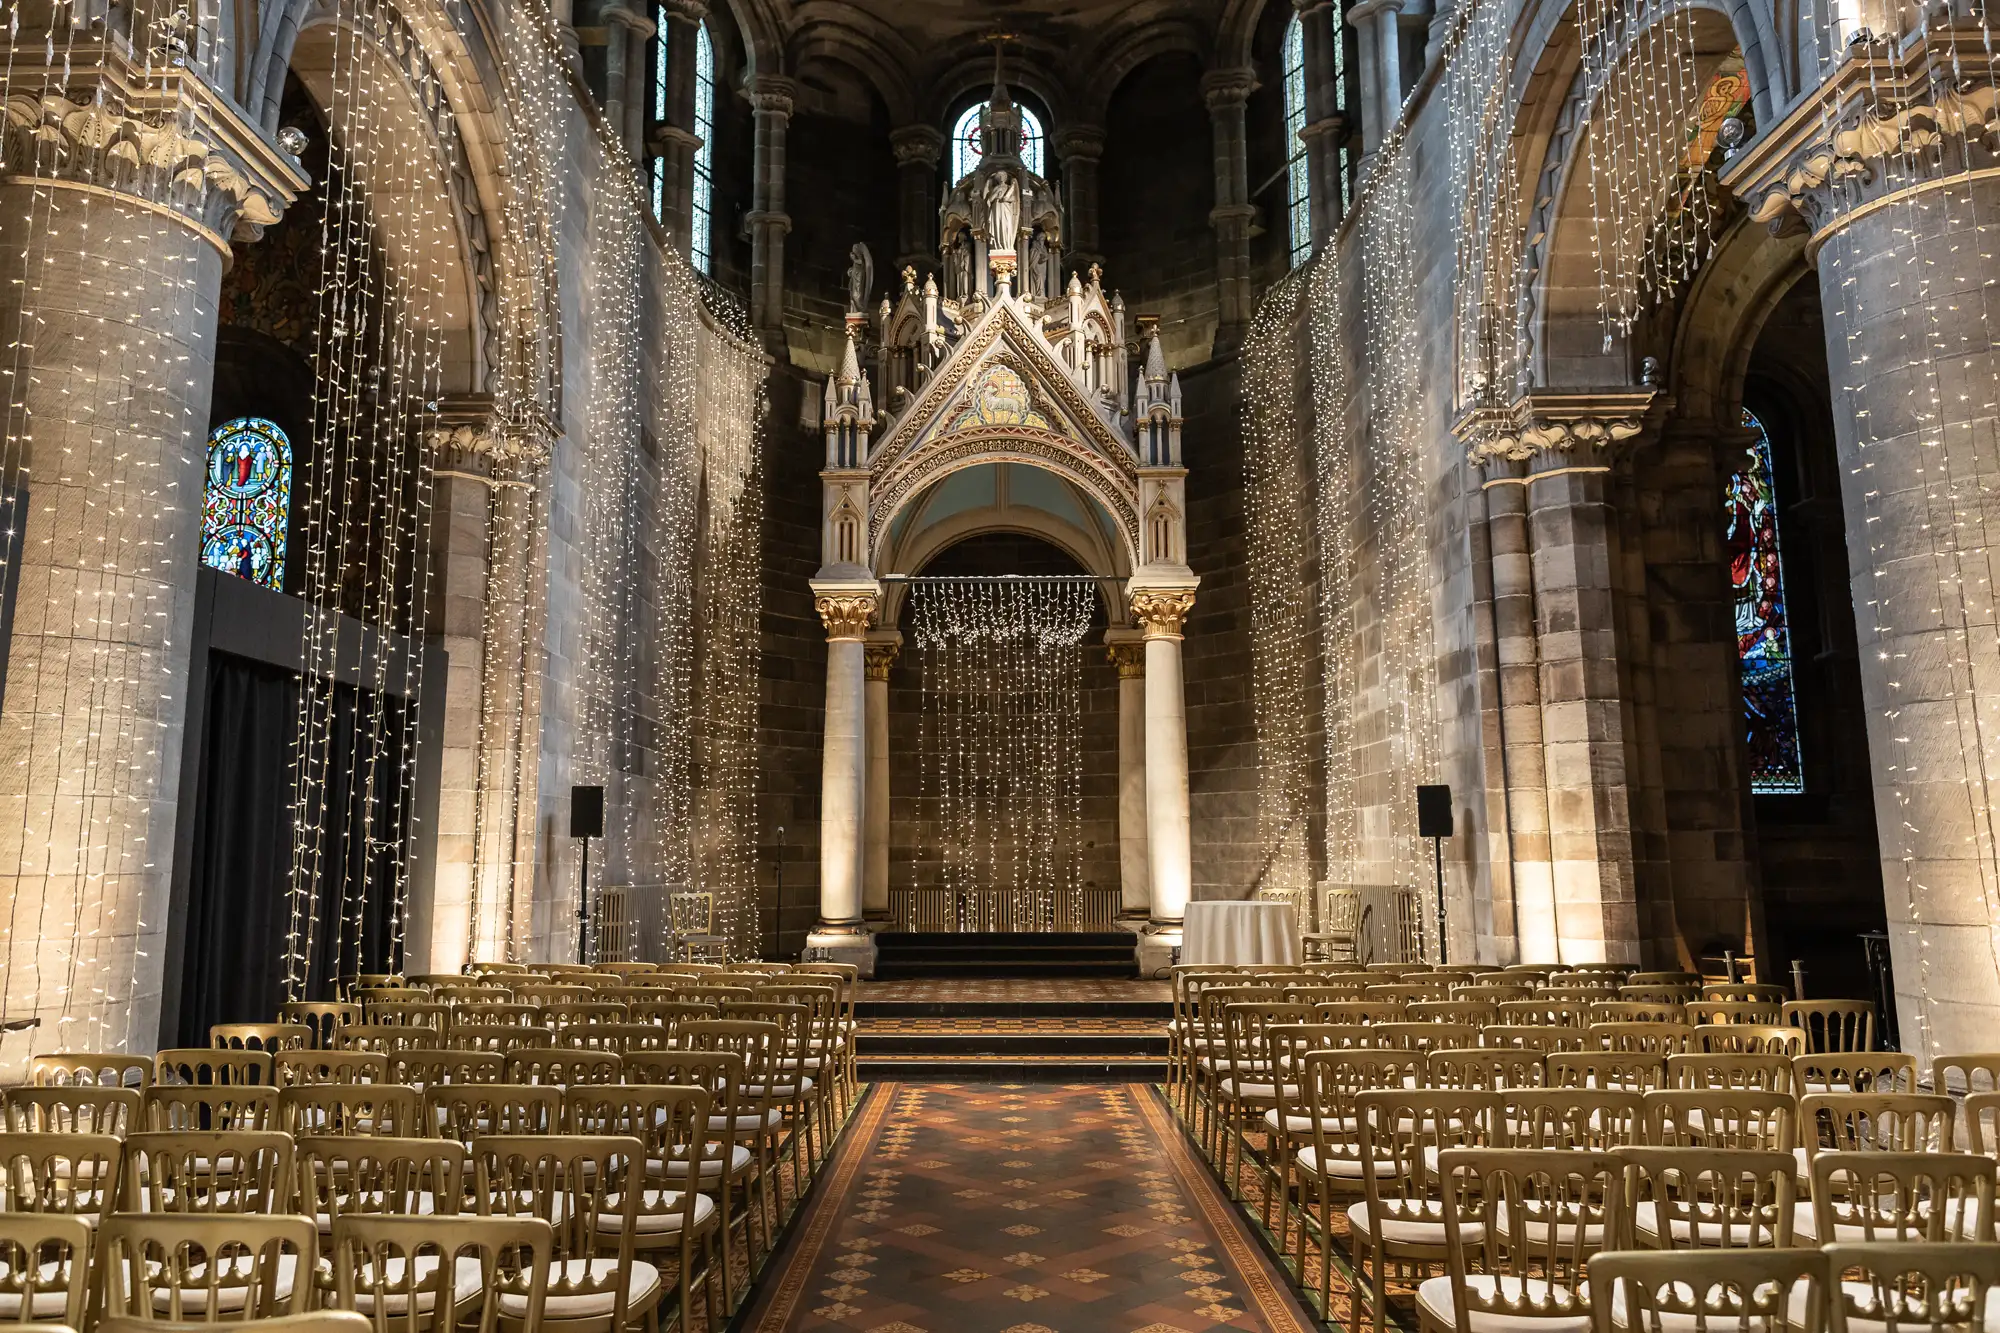 Interior of a gothic cathedral showing an arched ceiling, stained glass windows, and rows of chairs facing an ornate altar.